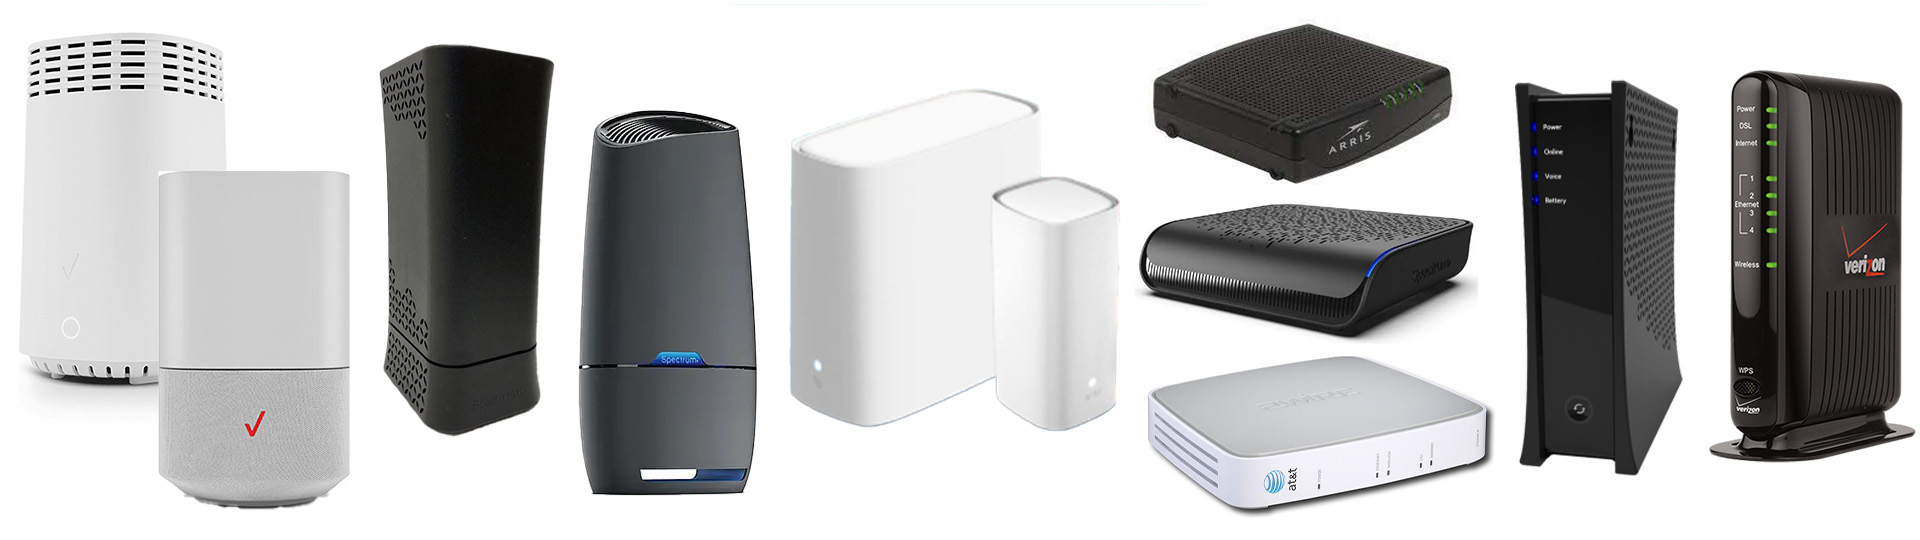 Examples of popular modems and routers